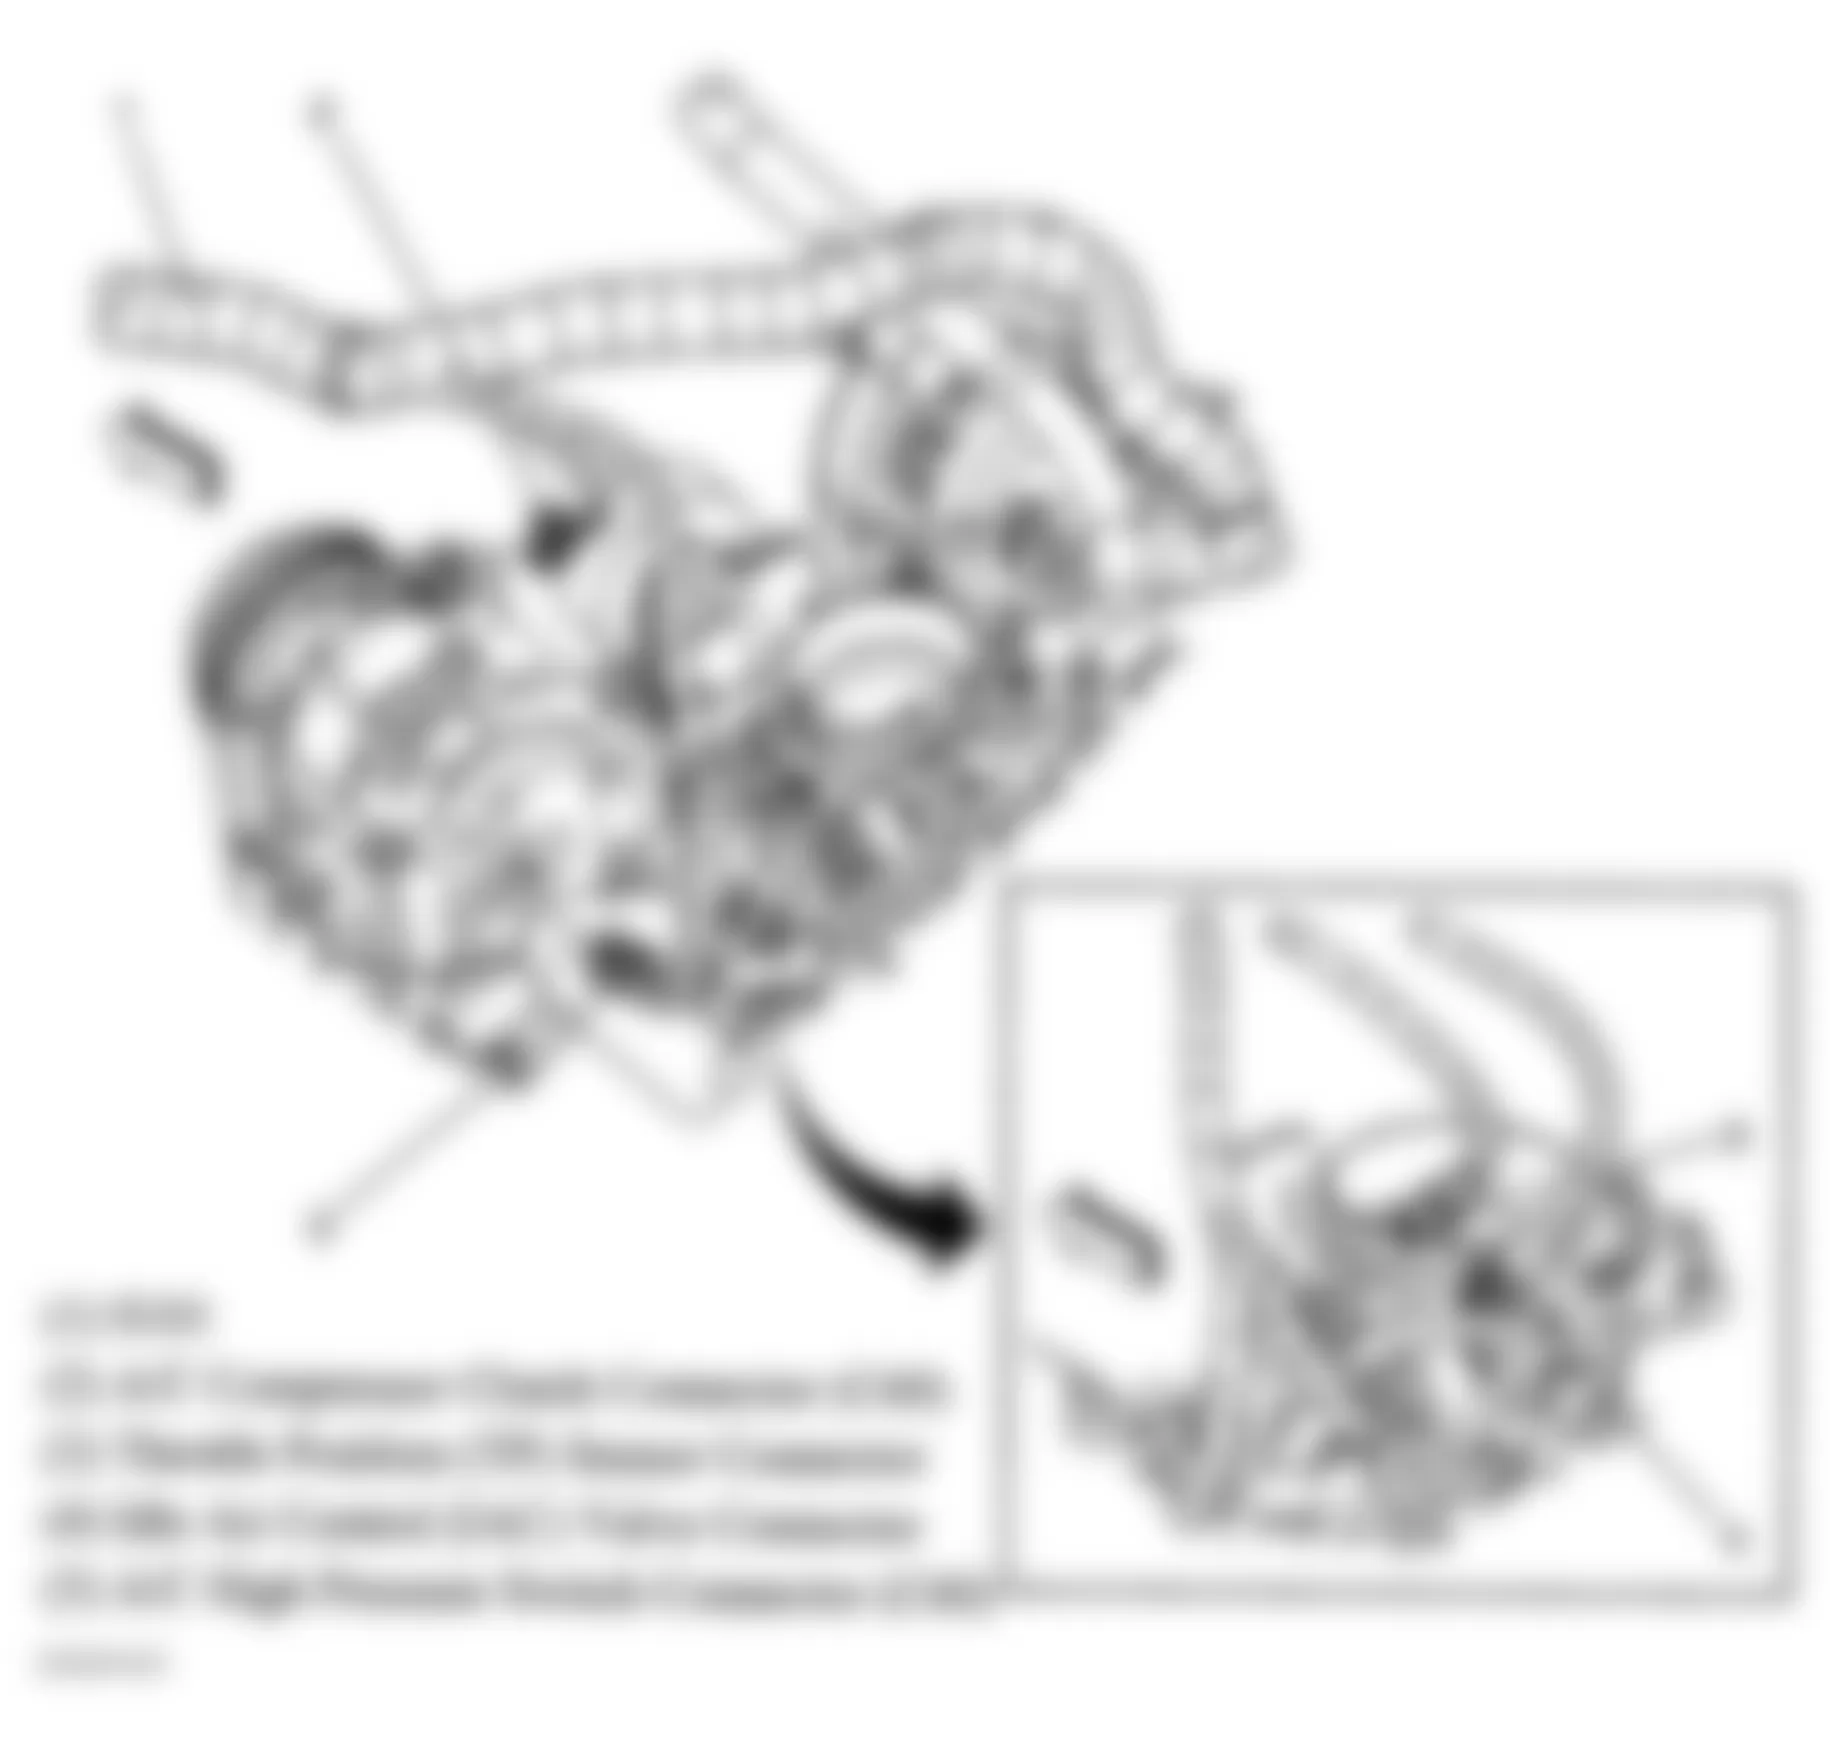 GMC Savana Special G3500 2004 - Component Locations -  Top Front Side Of Engine (4.3L VIN X)